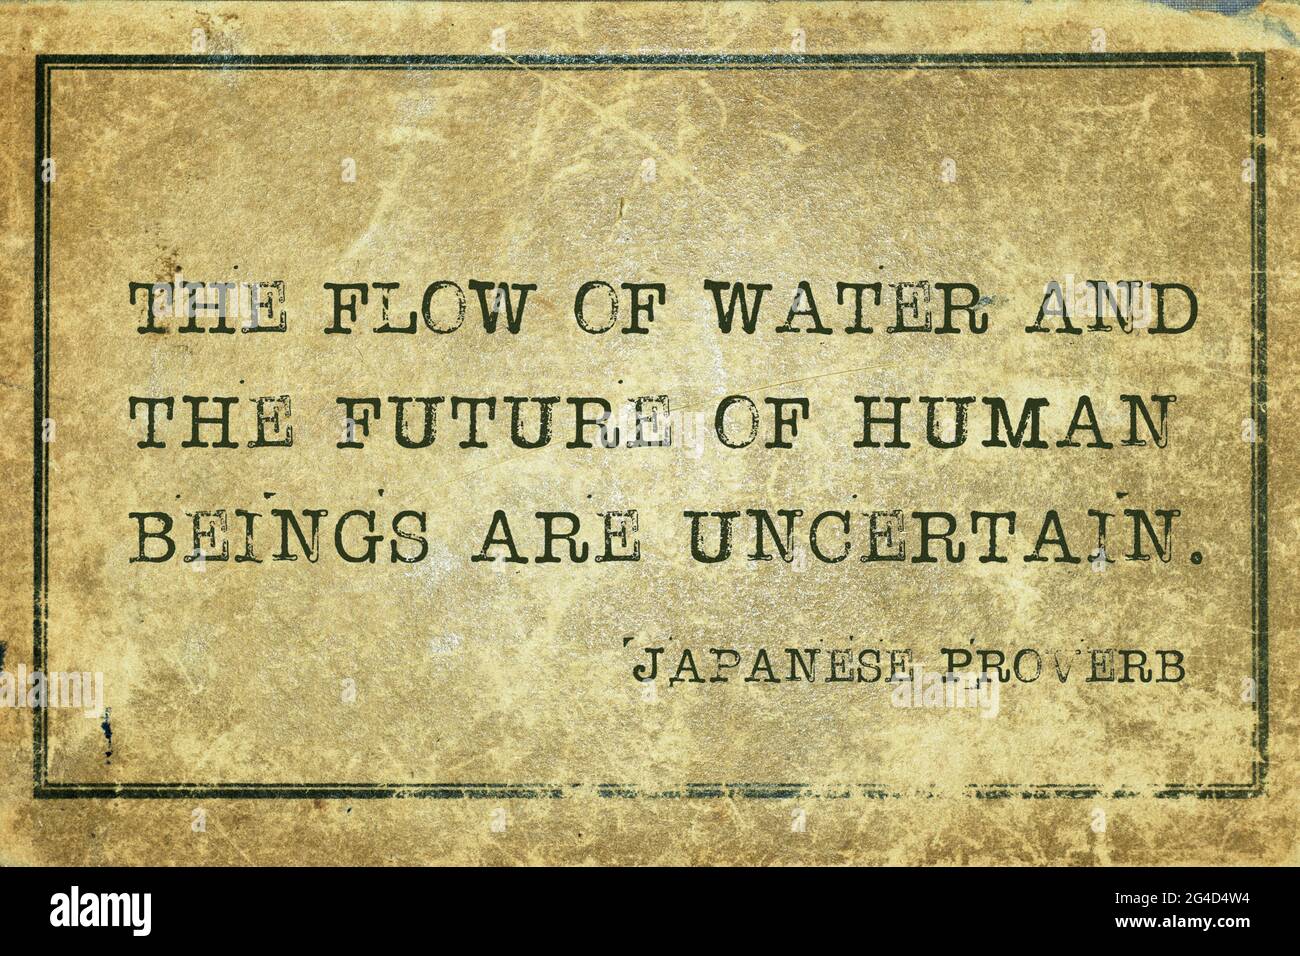 The flow of water and the future of human beings are uncertain - ancient Japanese proverb printed on grunge vintage cardboardfuture, human, Stock Photo